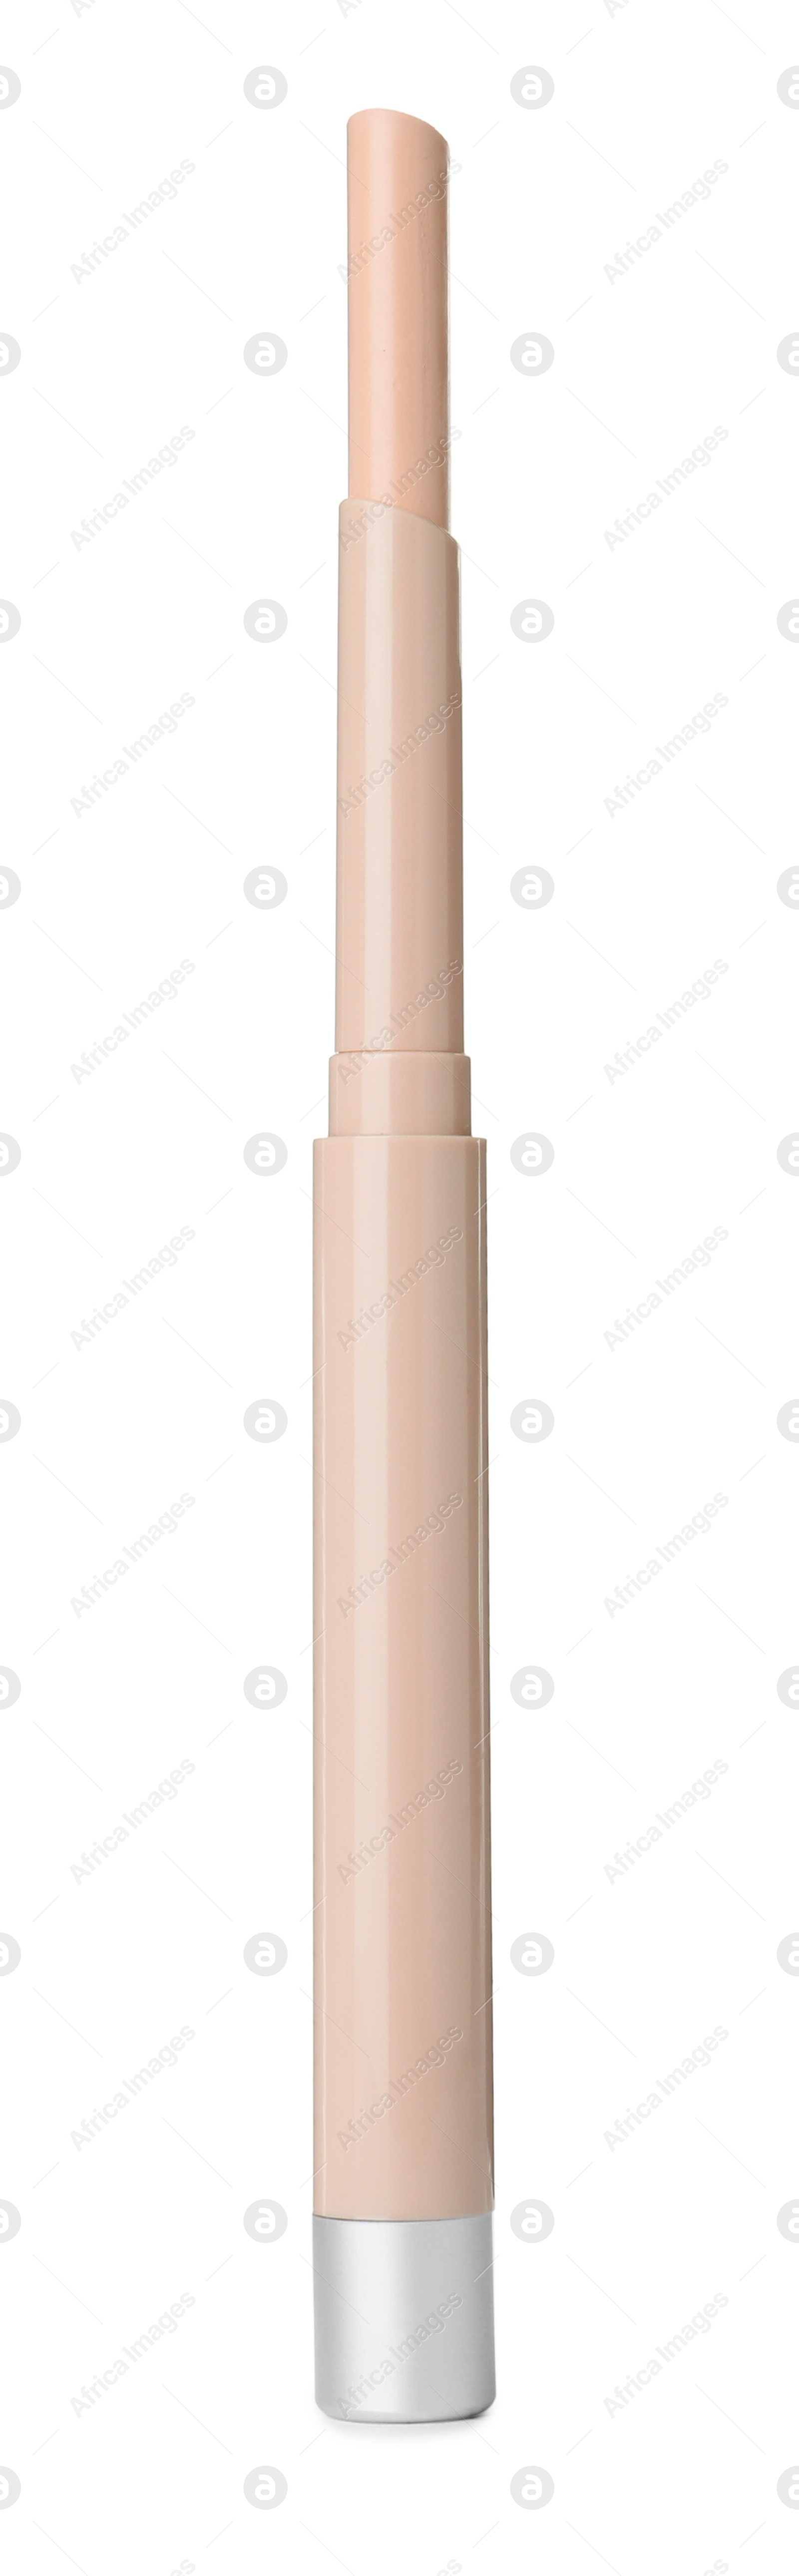 Photo of Tube of concealer isolated on white. Makeup product